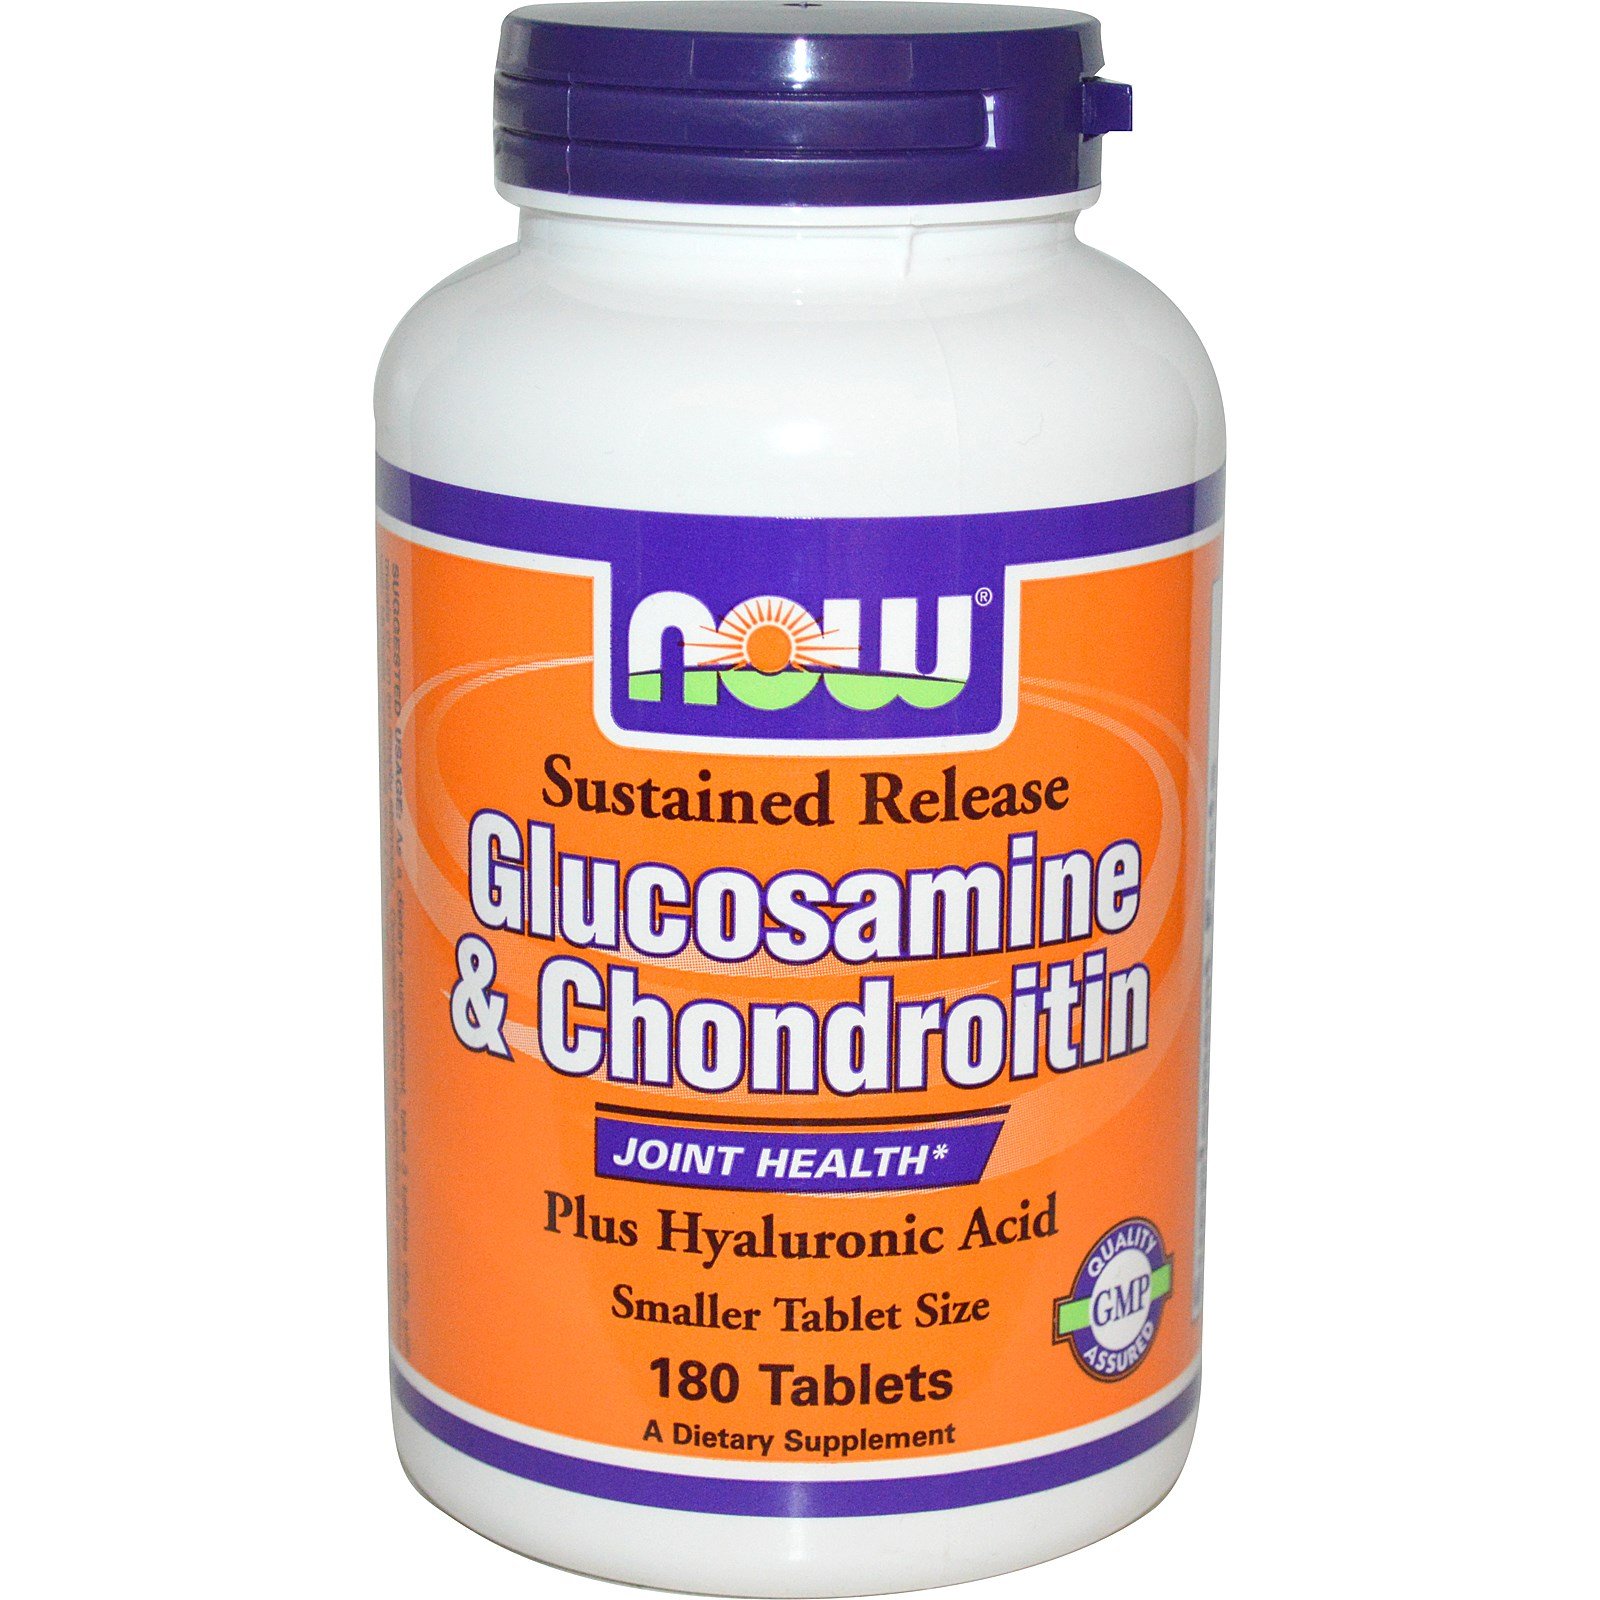 Glucosamine & Chondroitin, 180 piezas, Now. Glucosamina Condroitina. General Health Ligament and Joint strengthening 